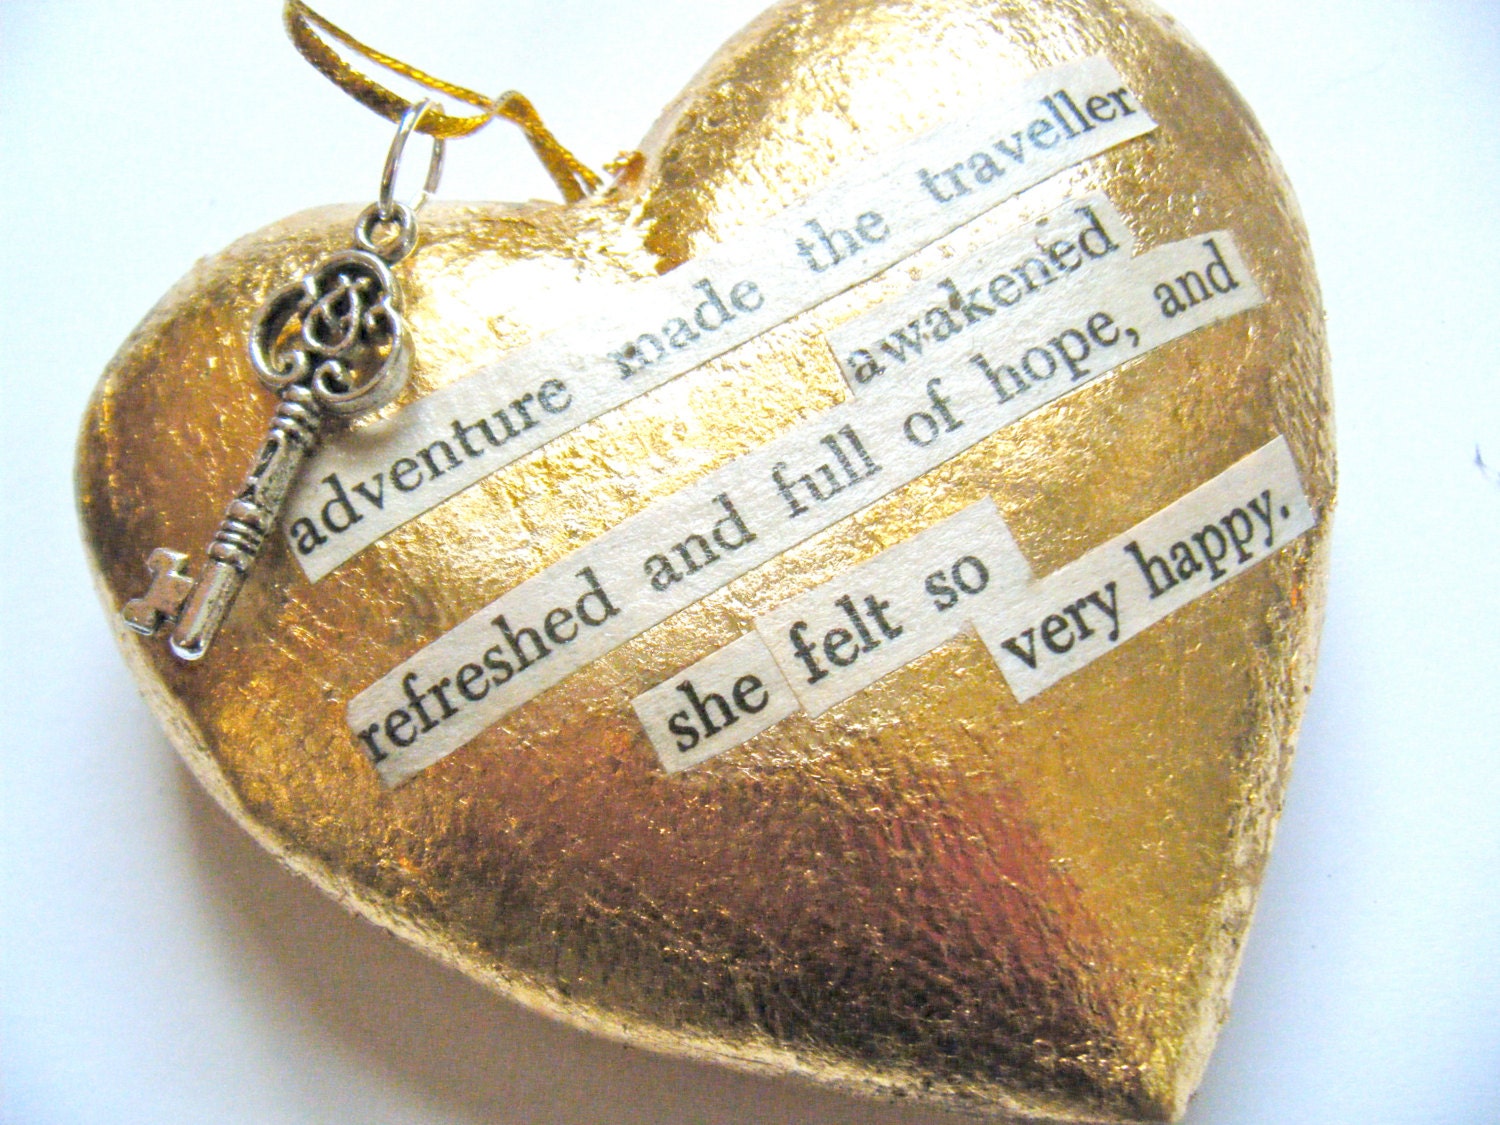 OOAK Gold Heart Found Poetry Ornament Wall Art Poem Upcycled Recycled Paper Repurposed Book Wizard of Oz Adventure Traveler Words Happy Key - HeidiKindFinds